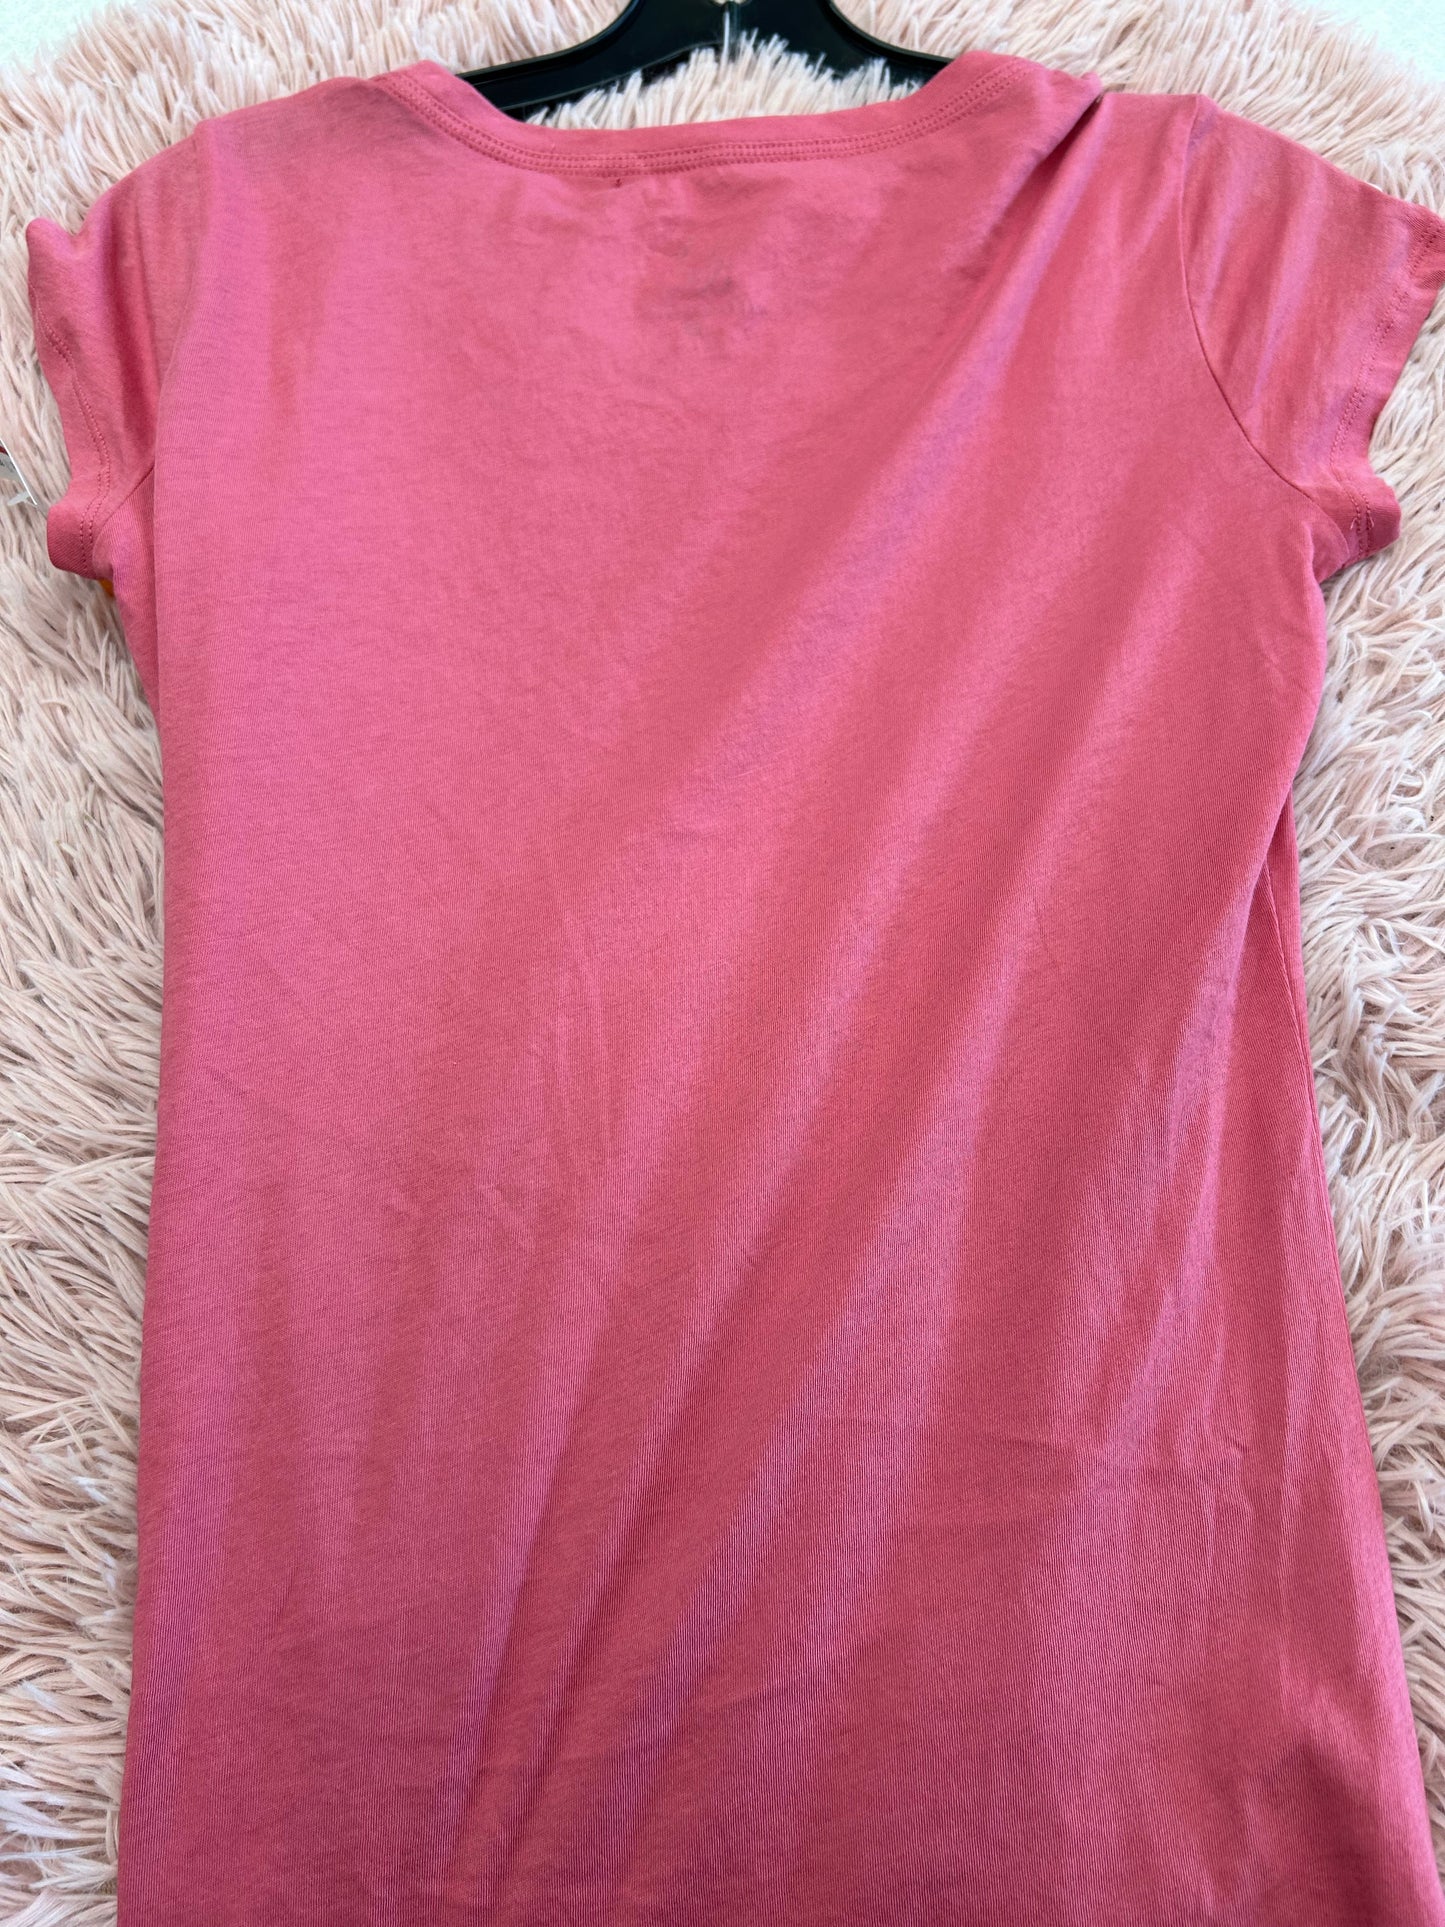 Pink Top Short Sleeve New York And Co, Size Xs